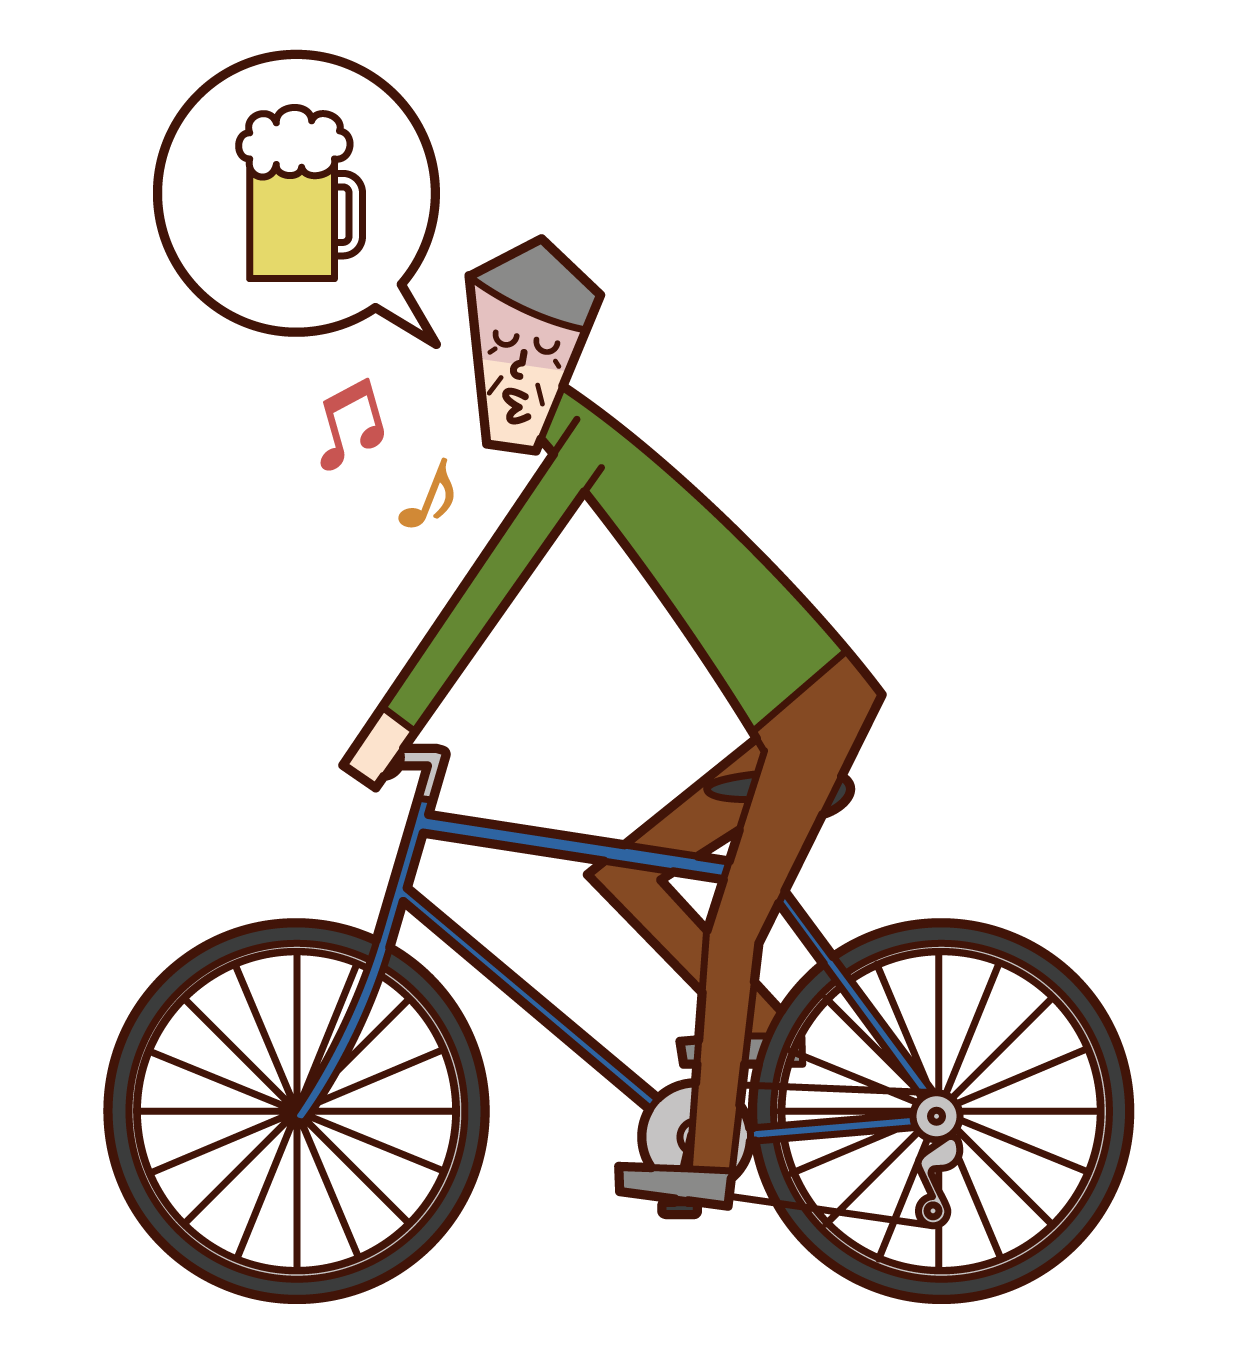 Illustration of a man falling over on a bicycle